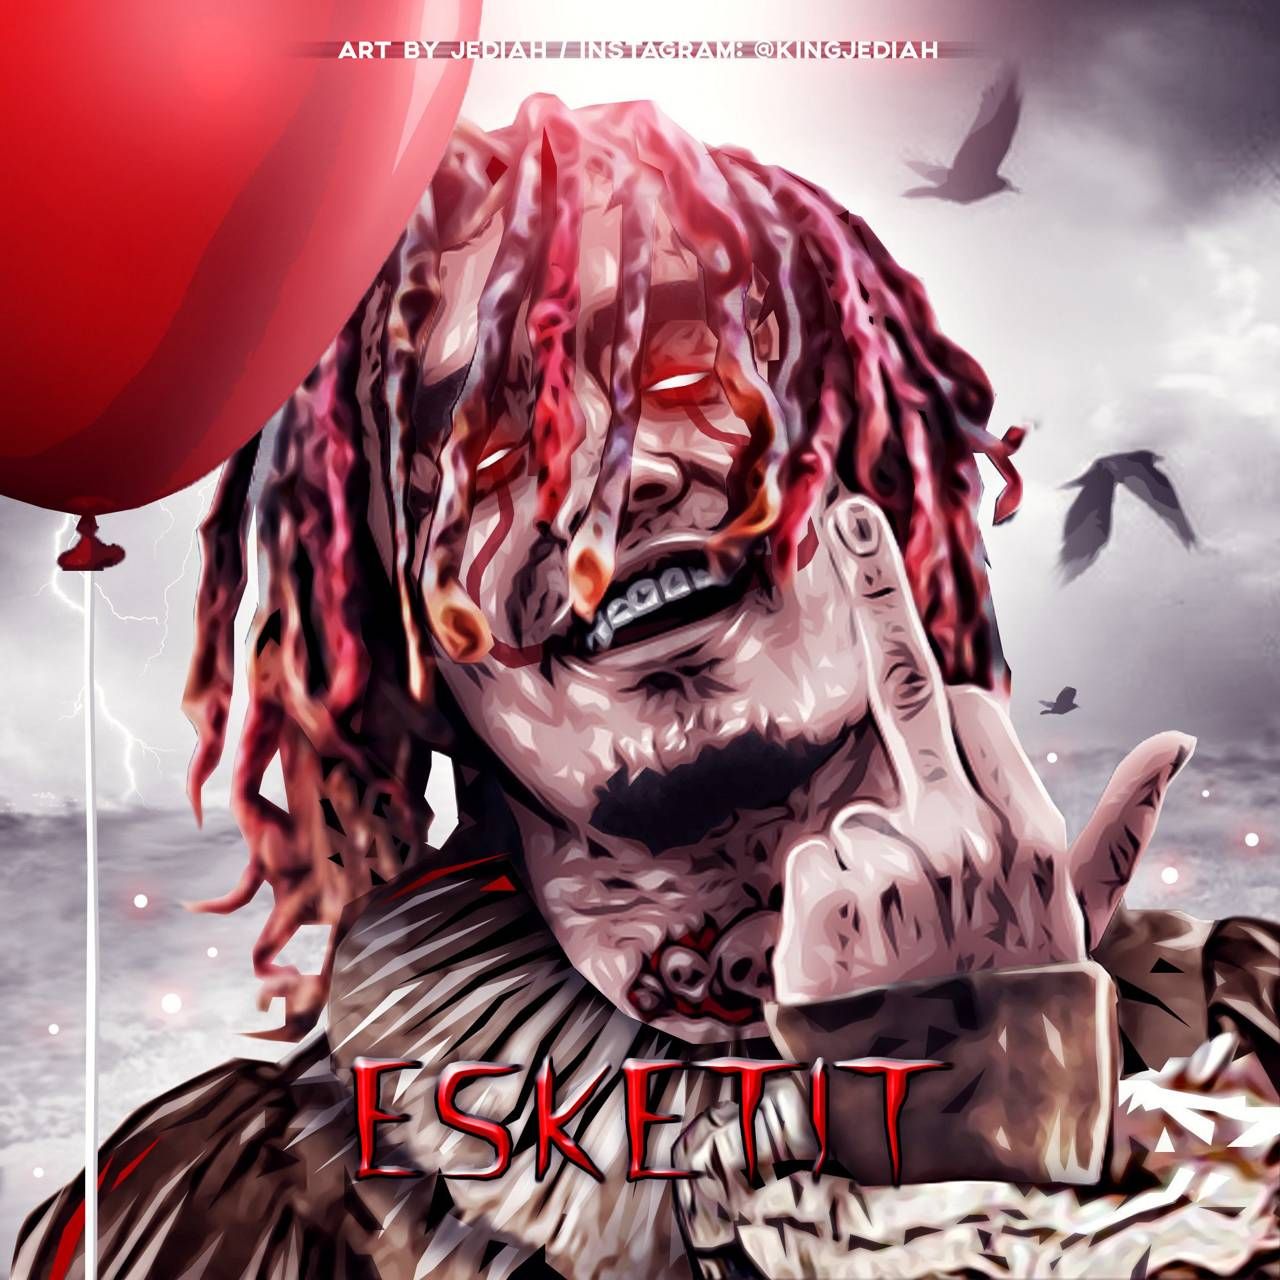 Free download download lil pump wallpaper lil pump wallpapers in x for your desktop mobile tablet explore lil lil pump boss wallpaper lil lil pump boss wallpaper